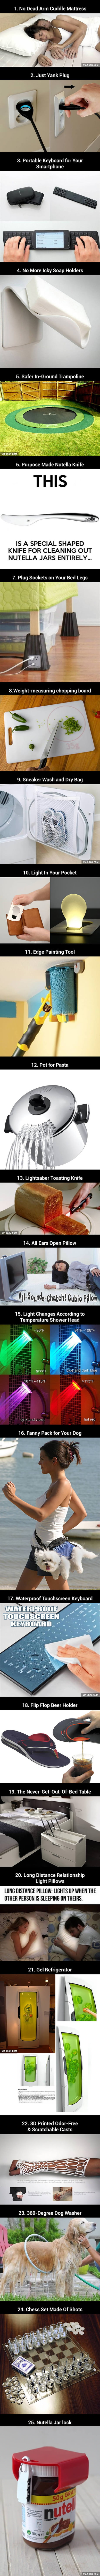 really cool inventions